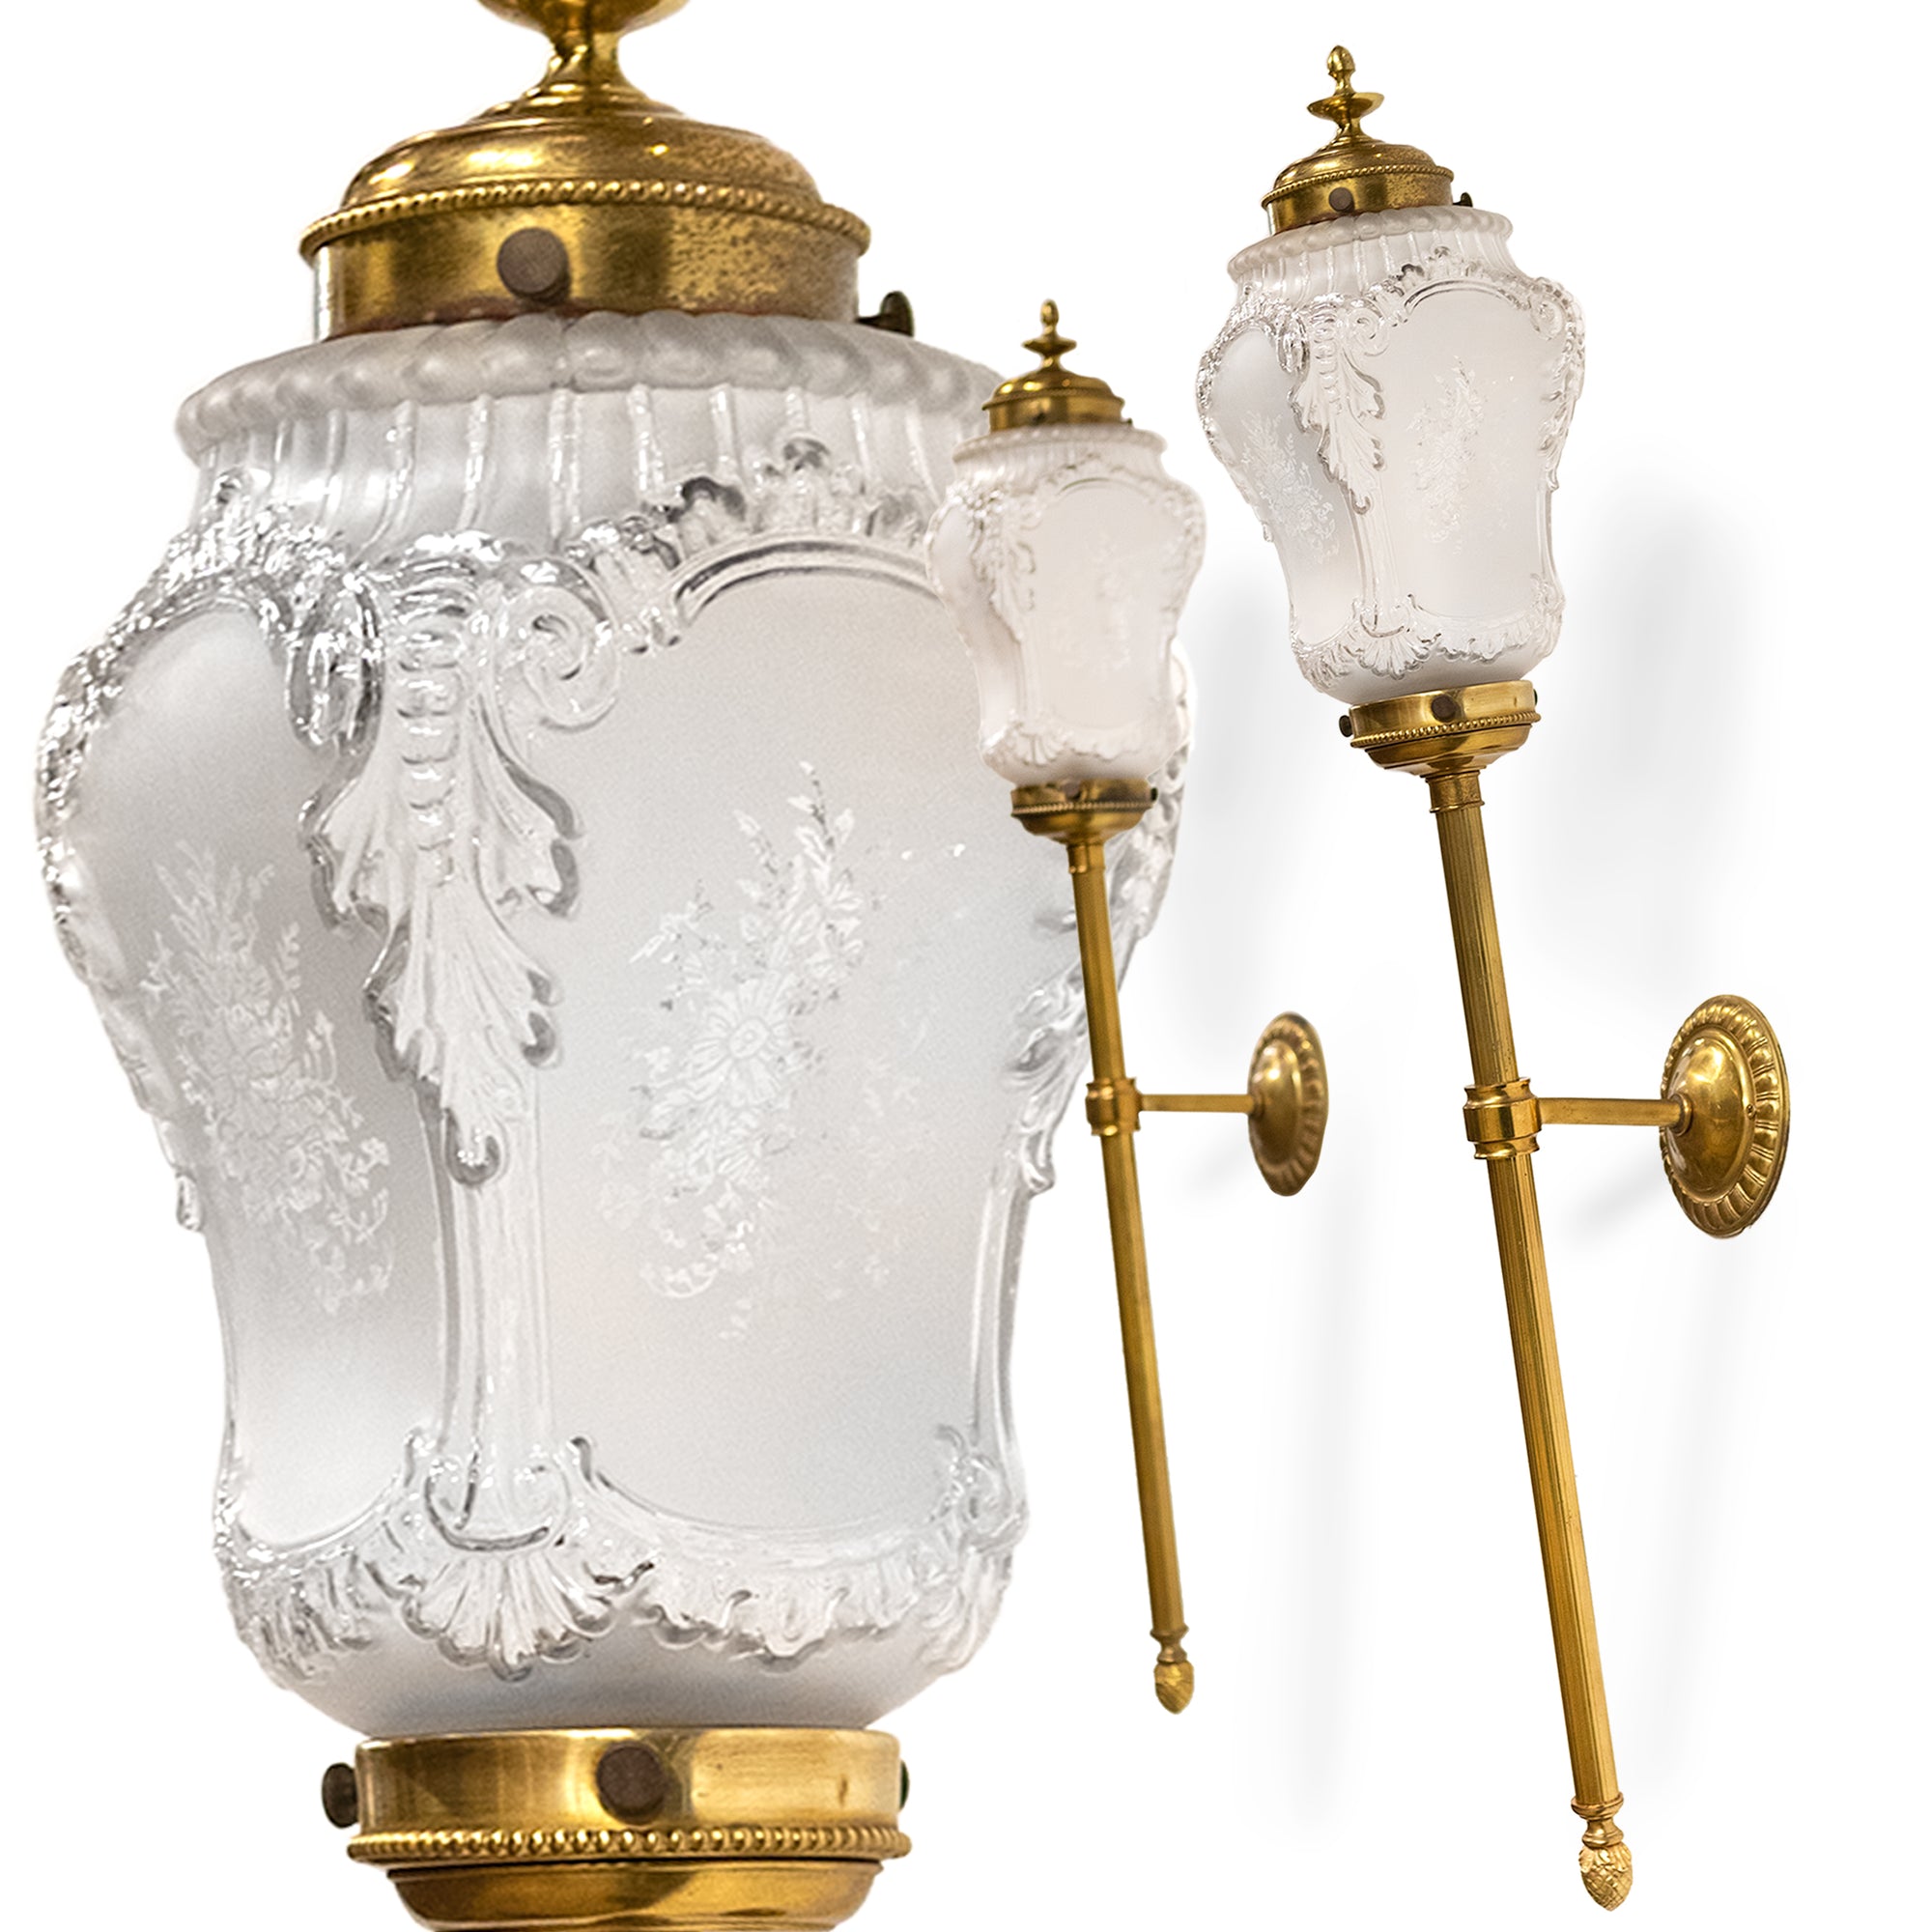 Pair of Antique Wall Sconce Torch Lights with Delicate Etched Glass | The Architectural Forum